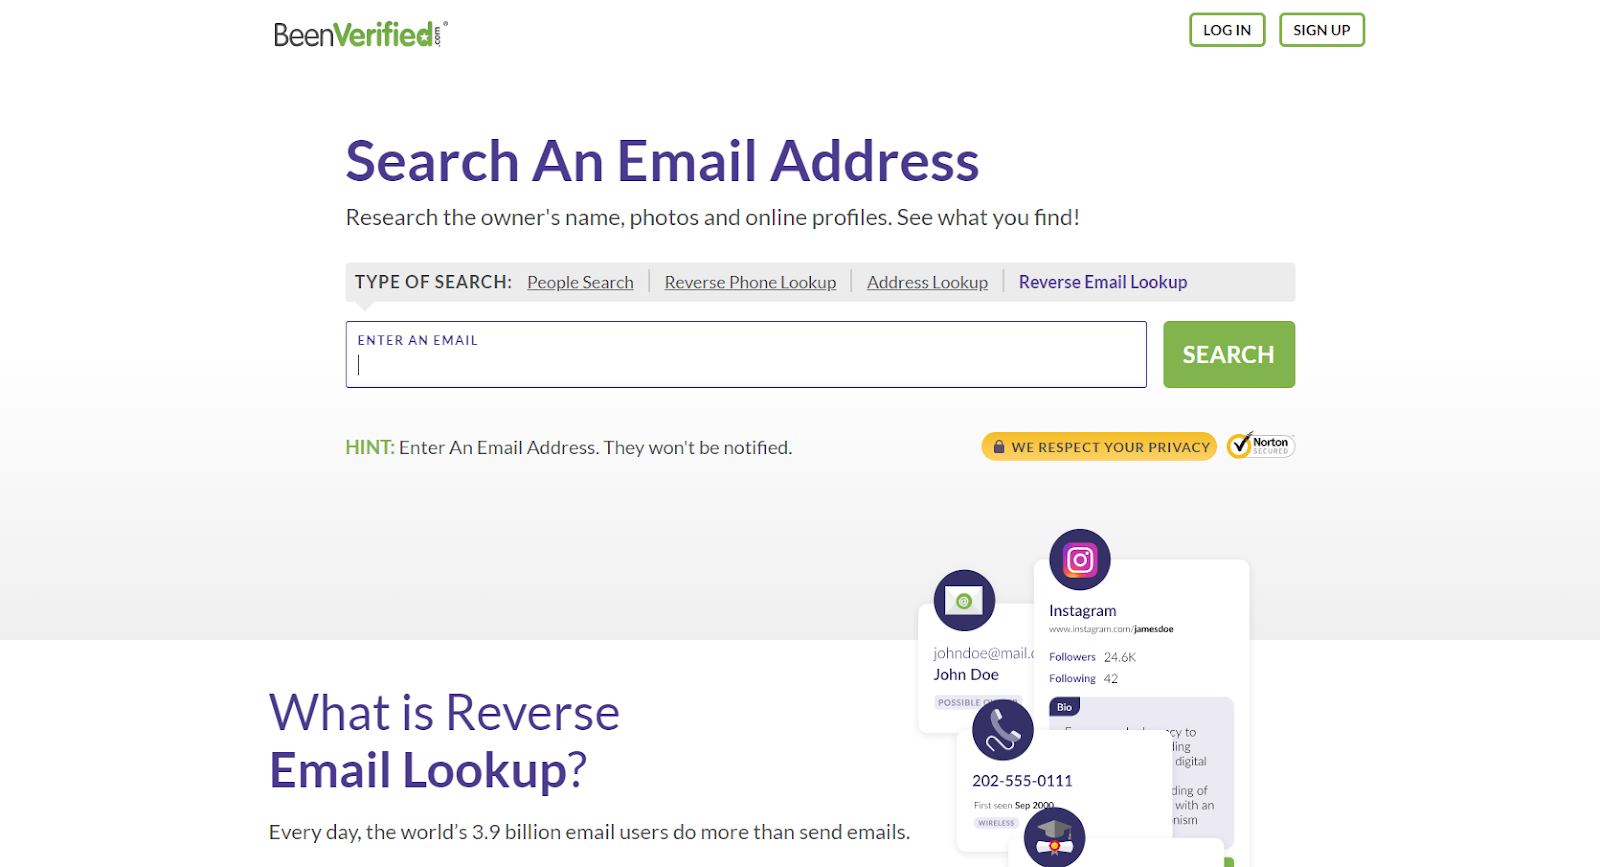 Best Reverse Email Lookup Tools: BeenVerified